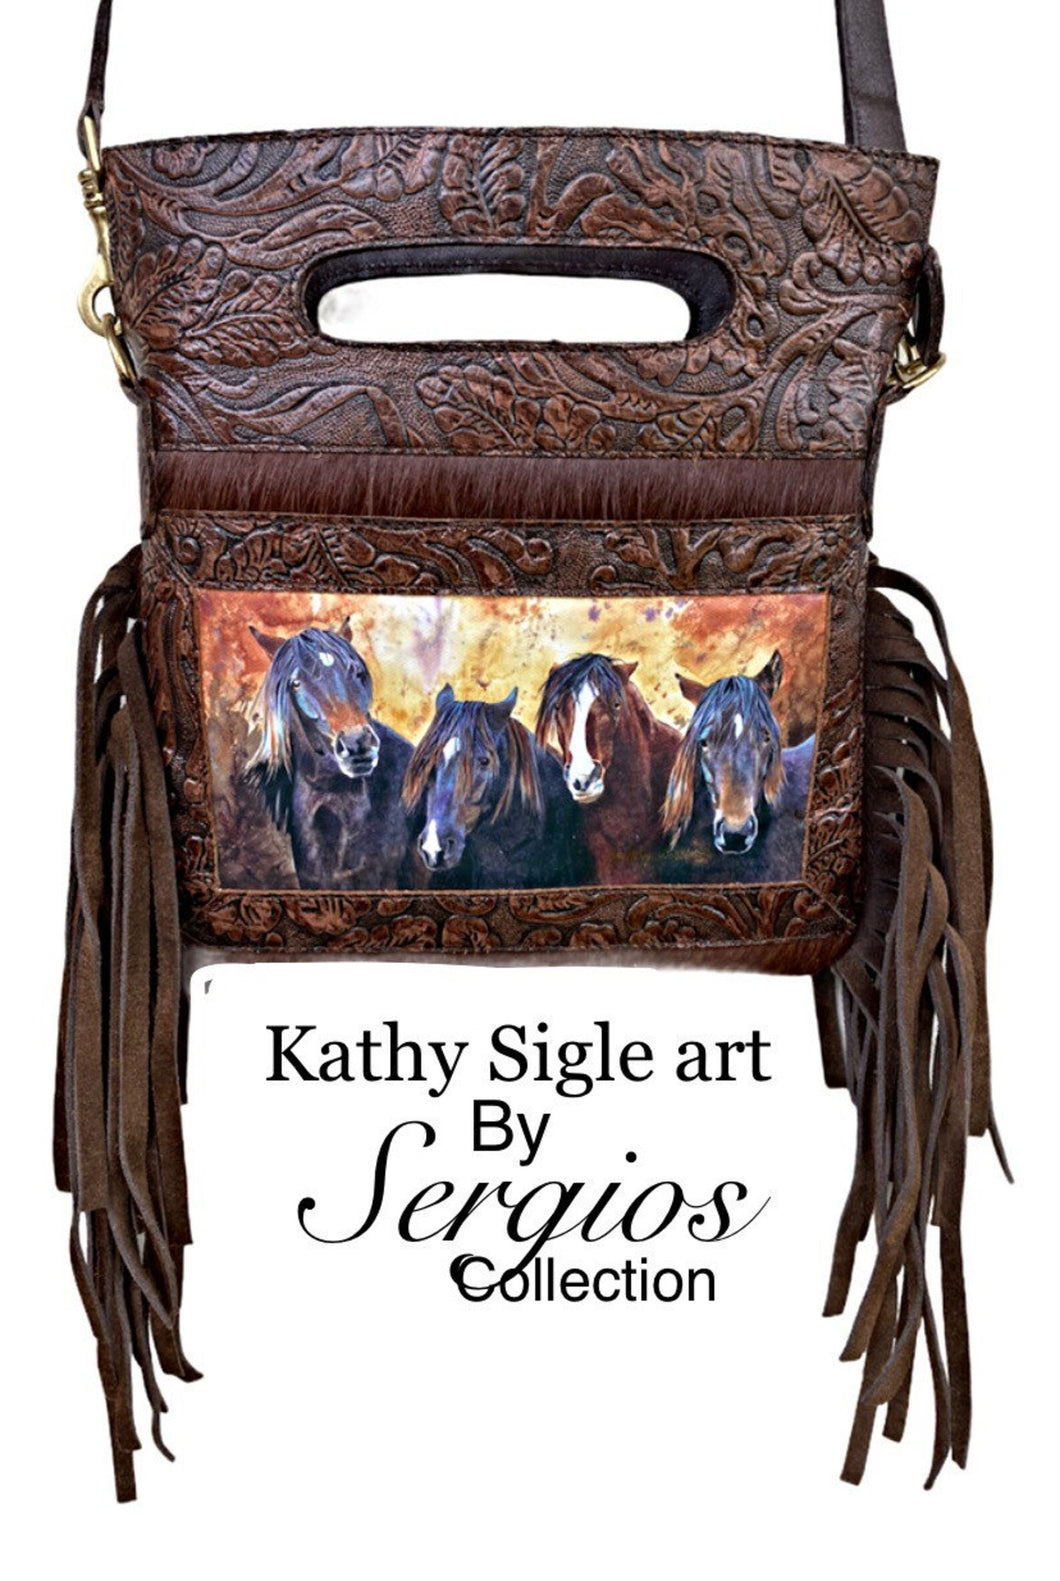 Kathy Sigle Art on Soft Embossed Leather Handbag by Sergios Collection